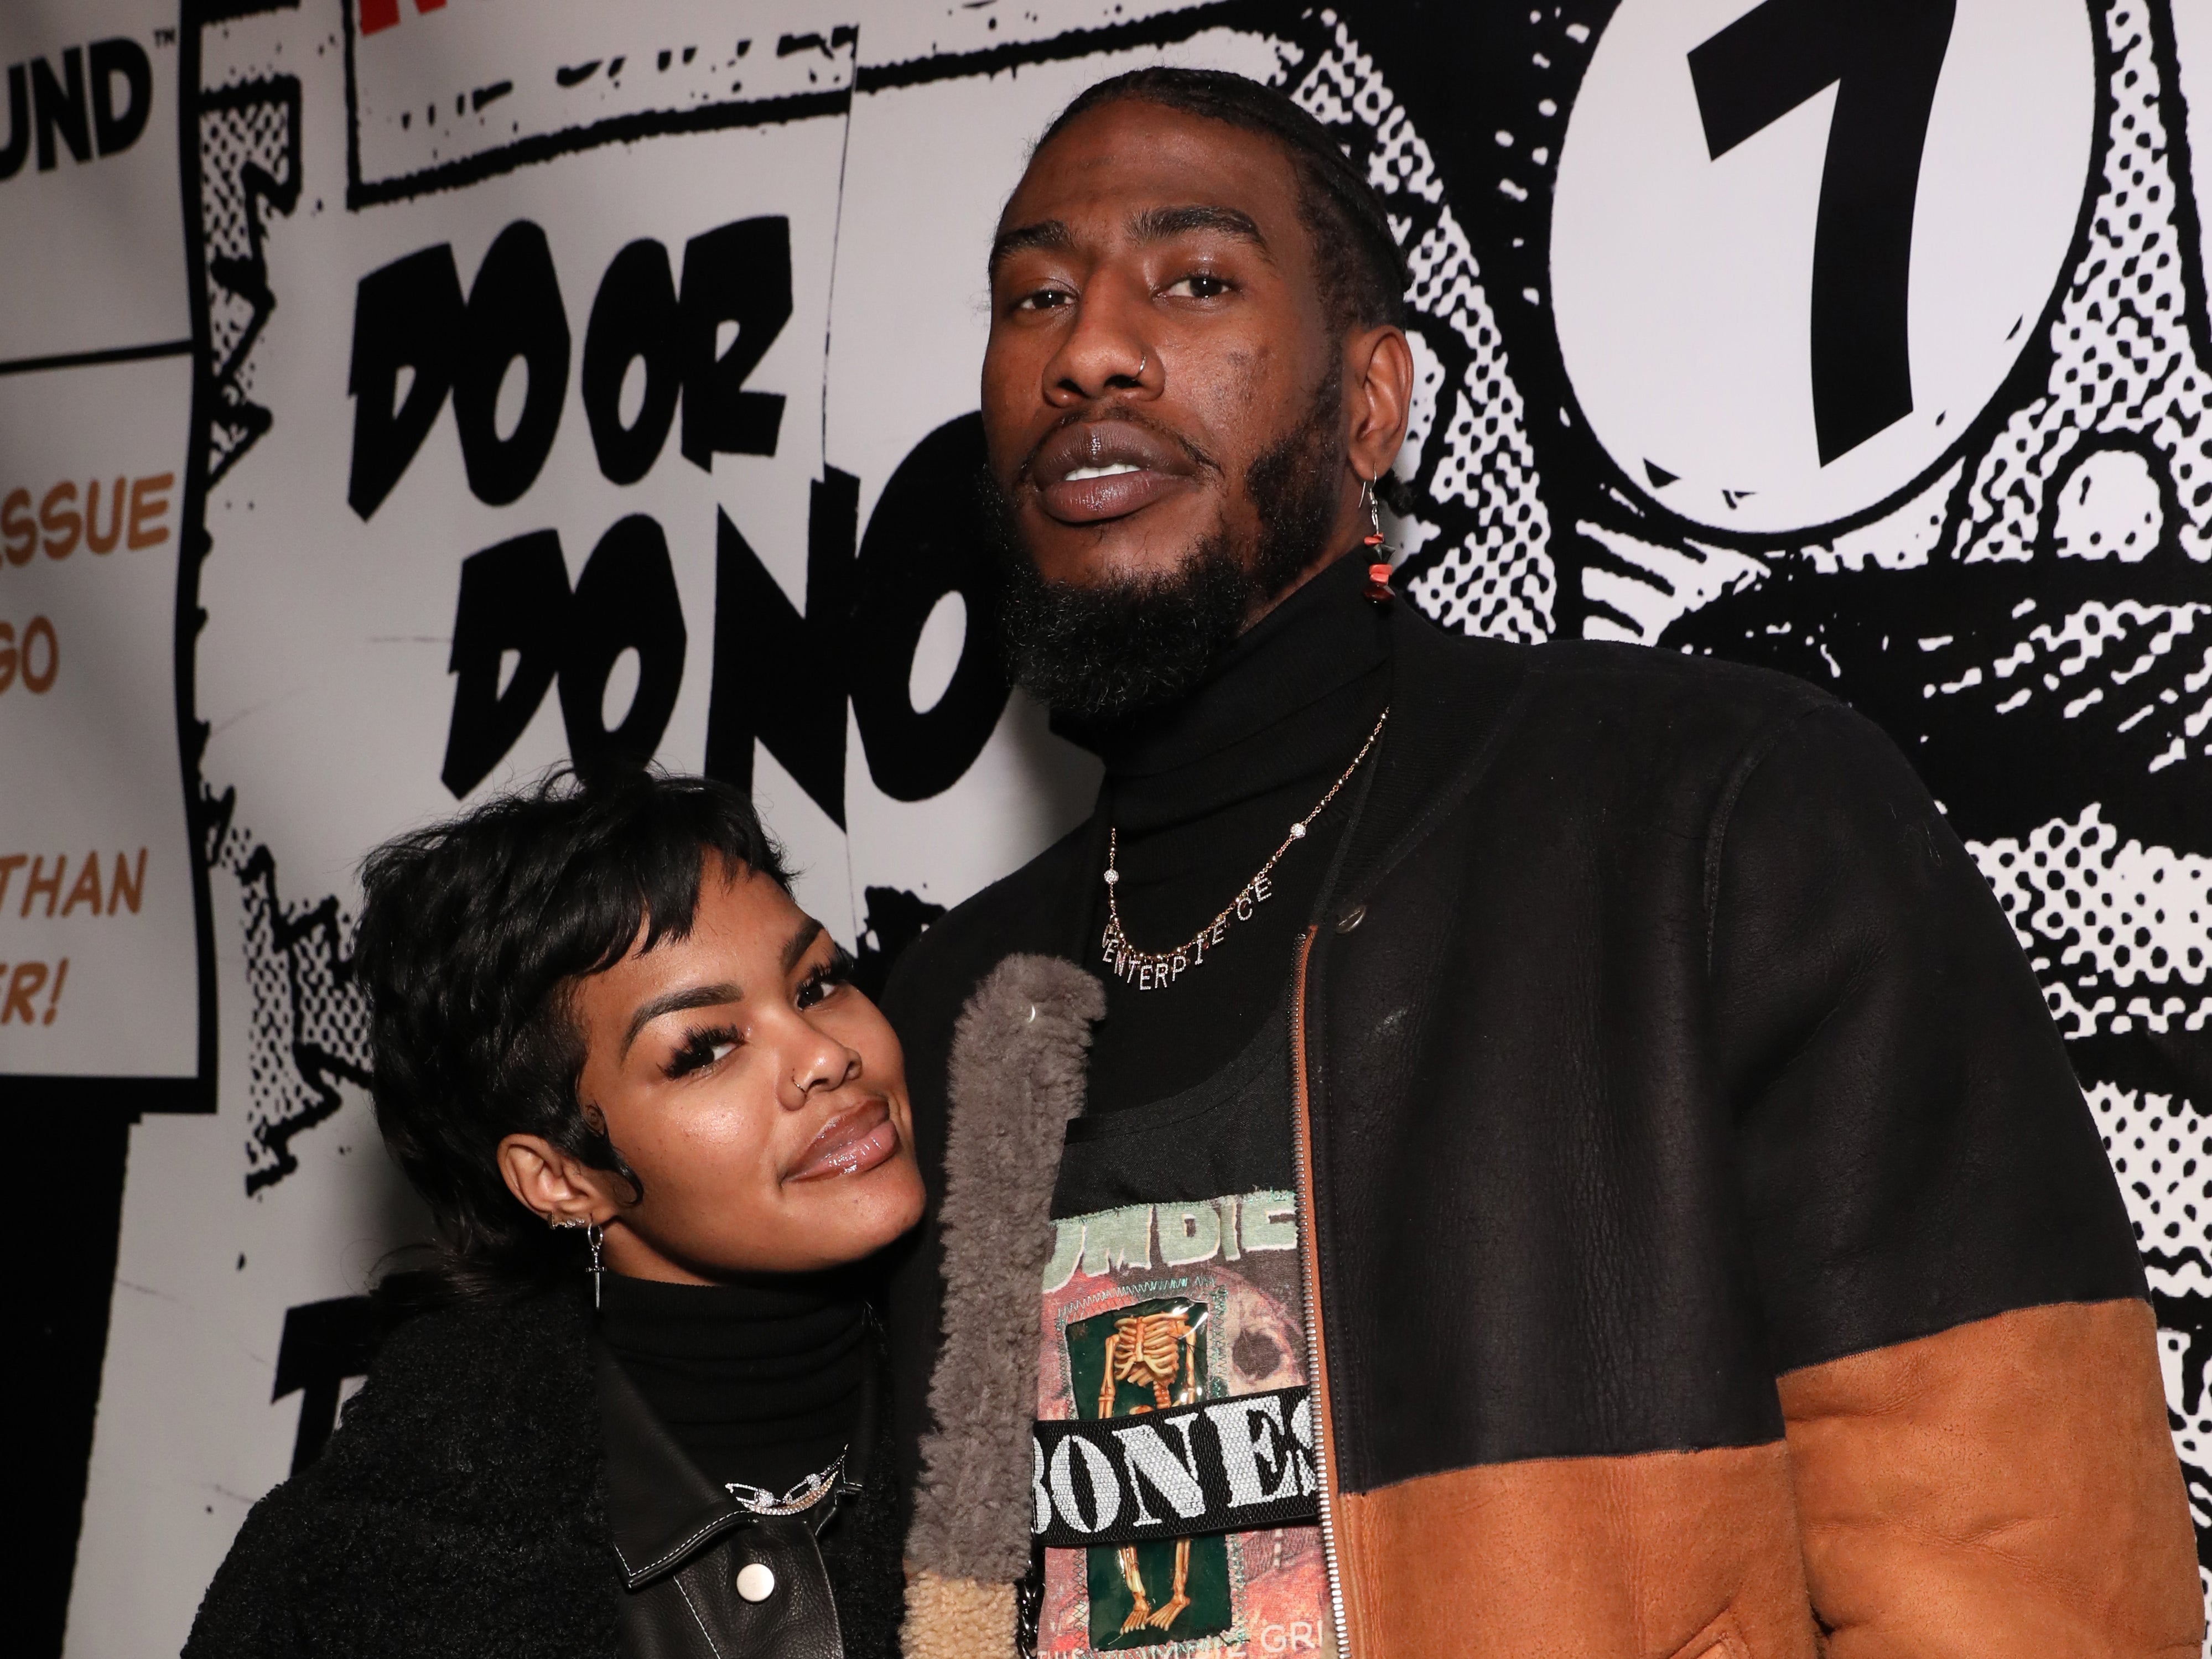 Taylor and Shumpert are separating after seven years of marriage